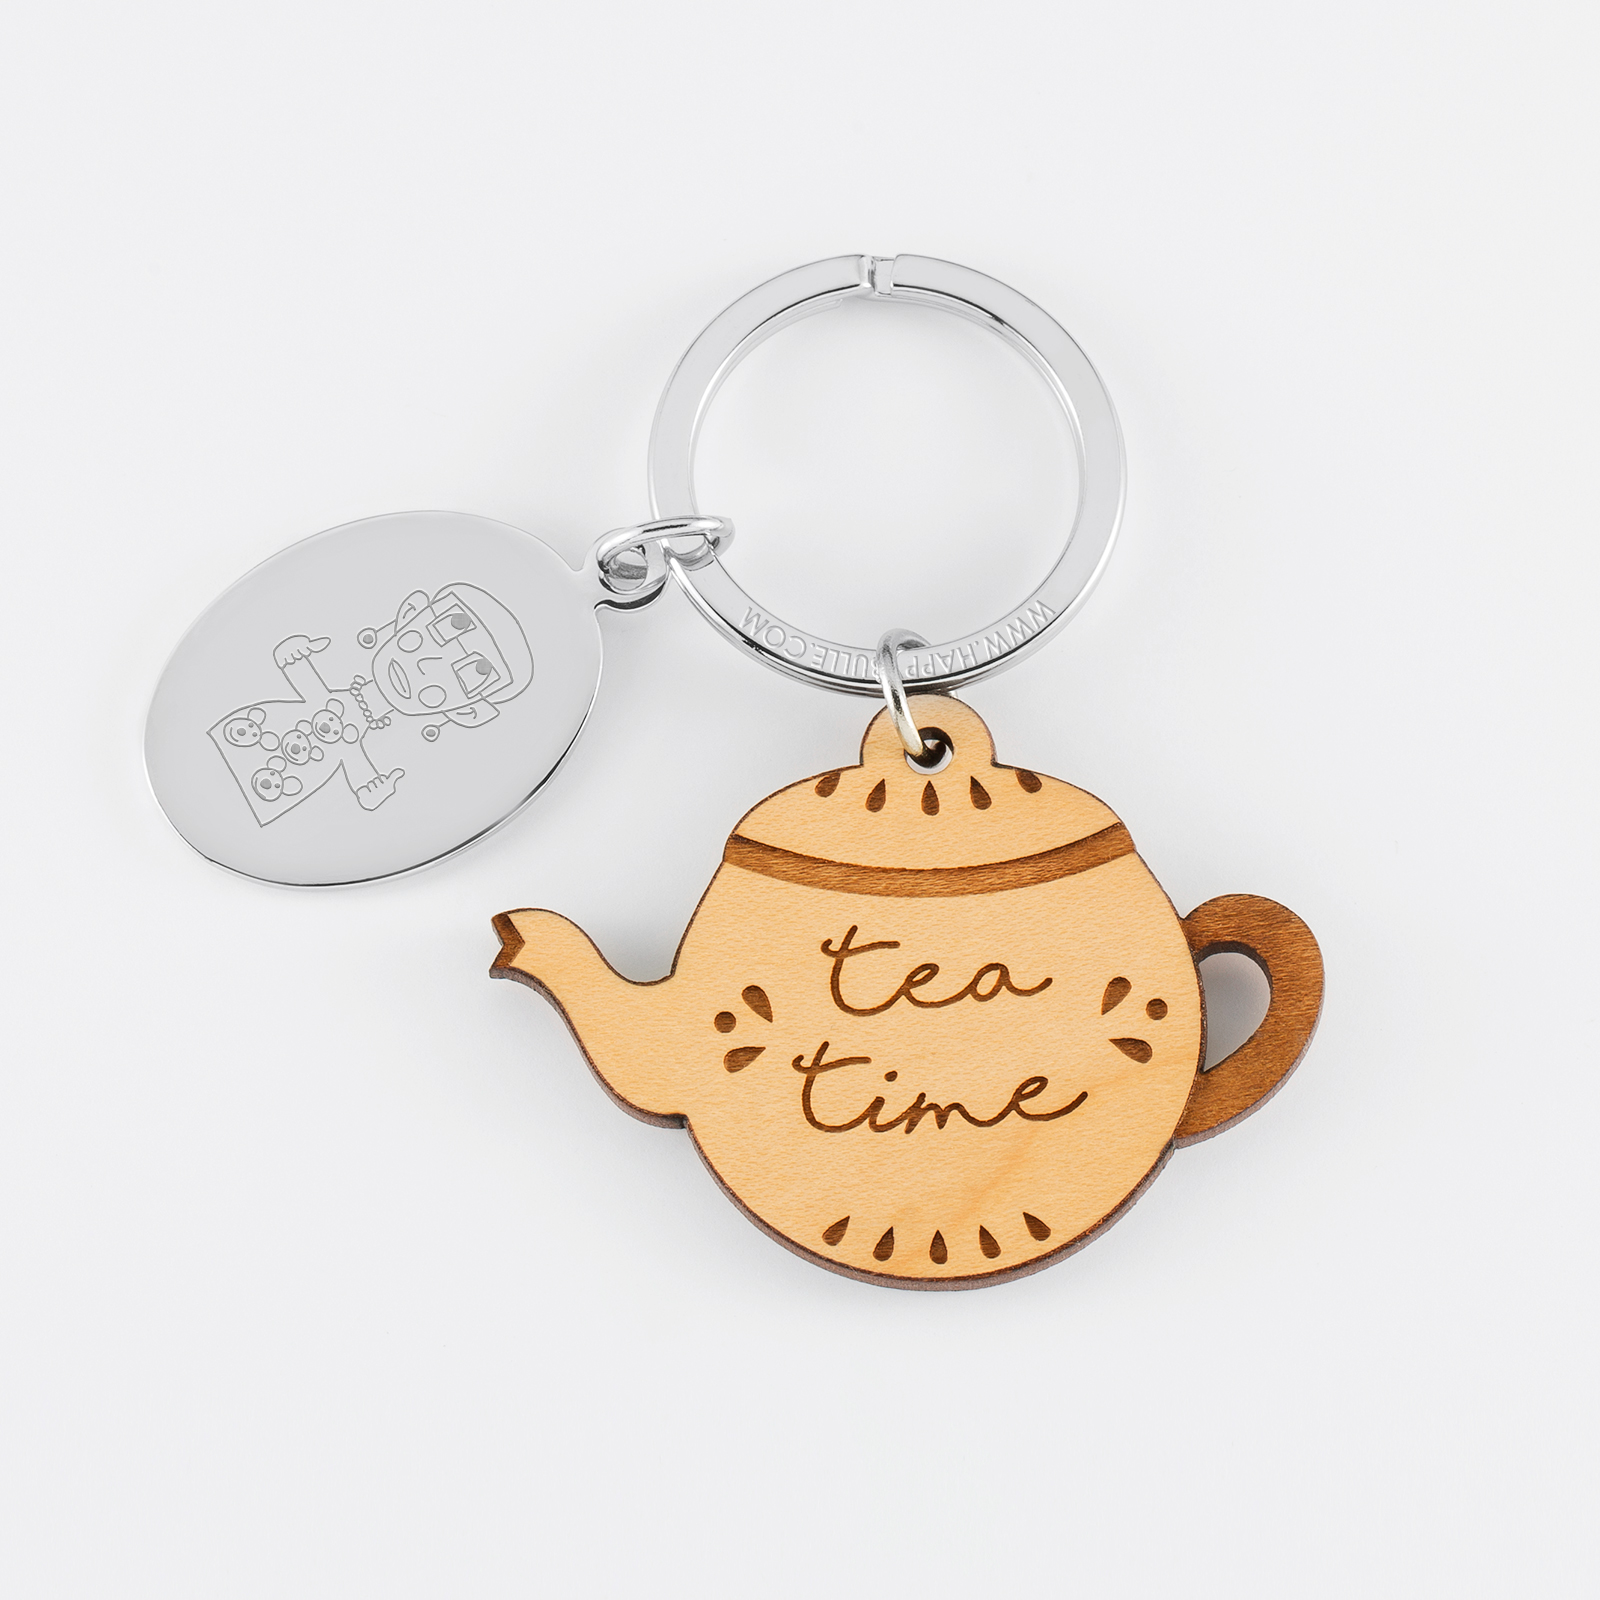 Personalised engraved oval steel medallion and wooden tea charm keyring - sketch